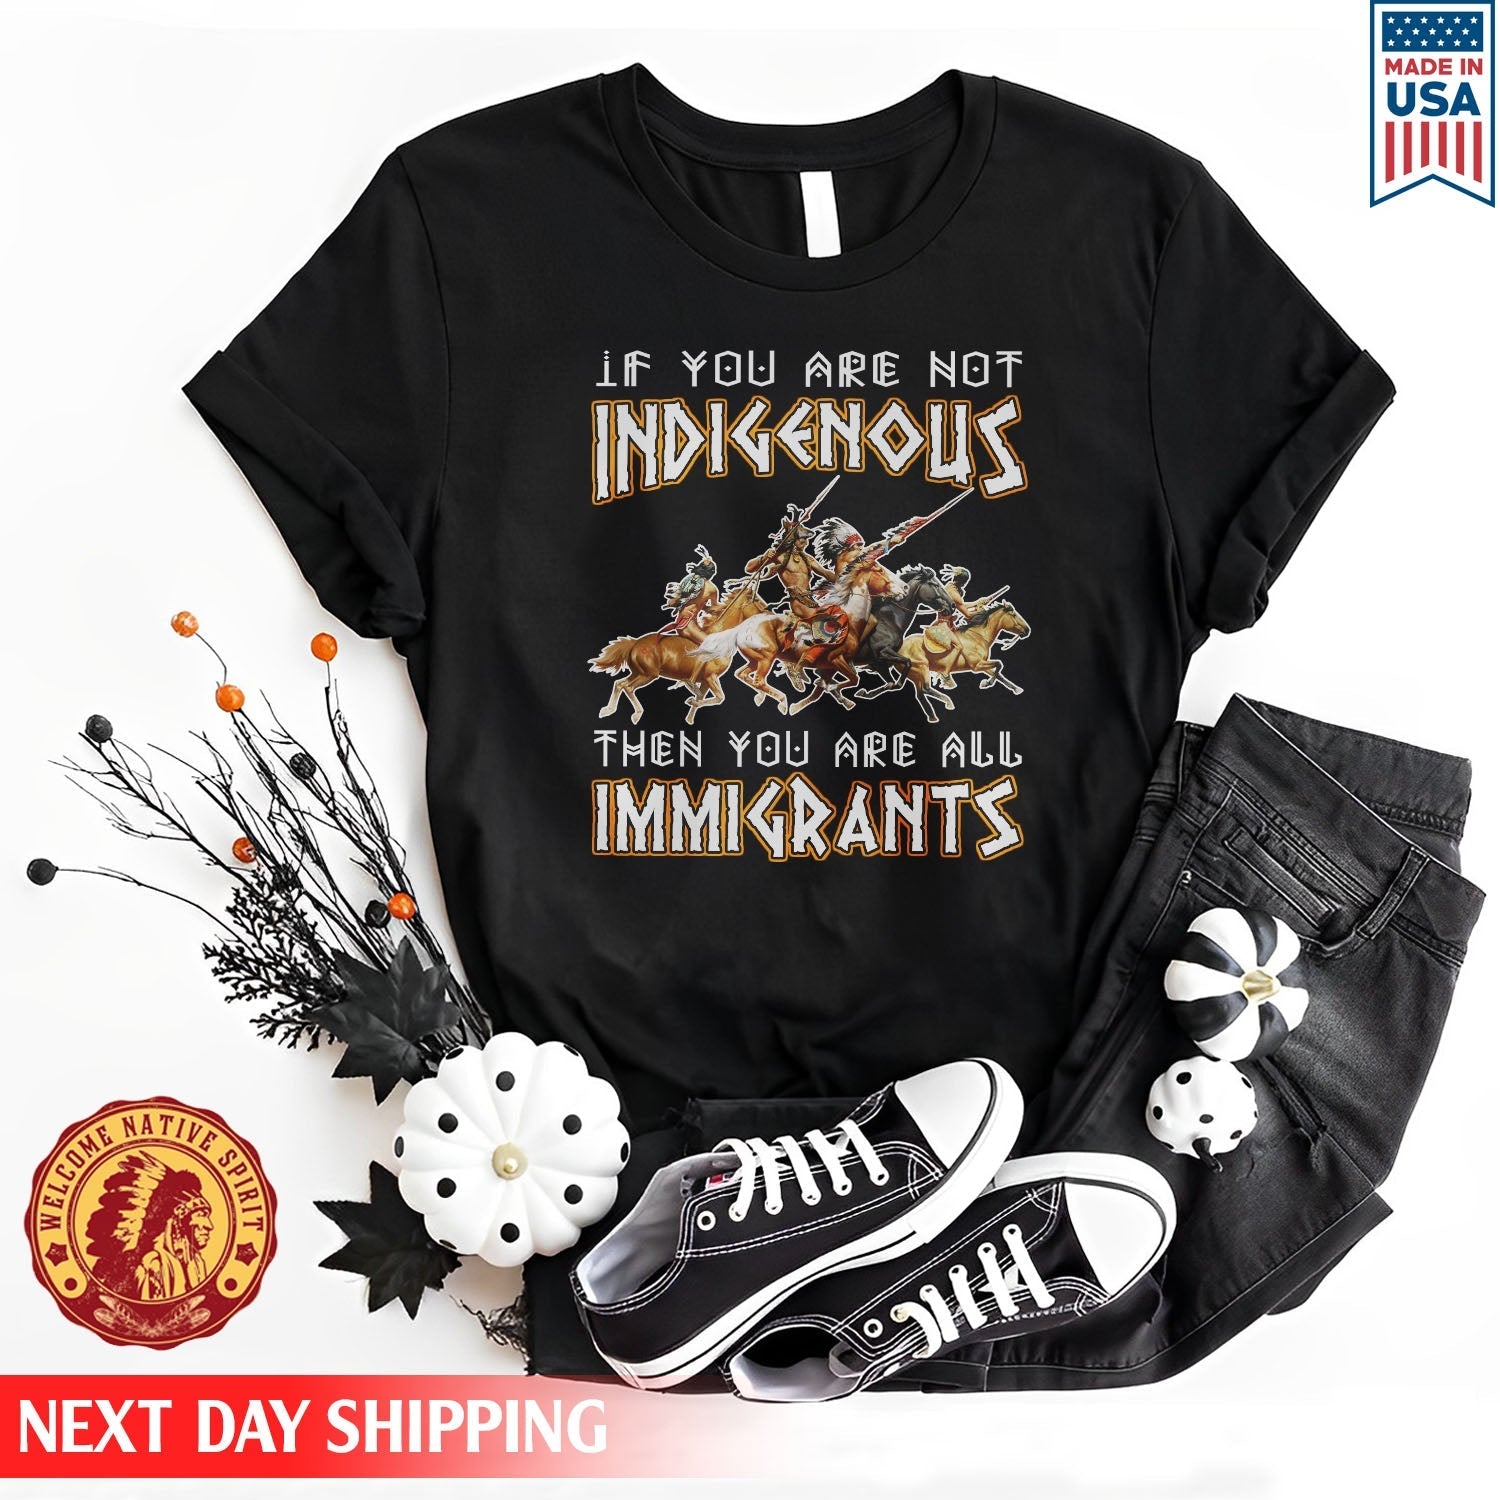 Native American If You Are Not Indigenous Then You Are All Immigrants Unisex T-Shirt/Hoodie/Sweatshirt